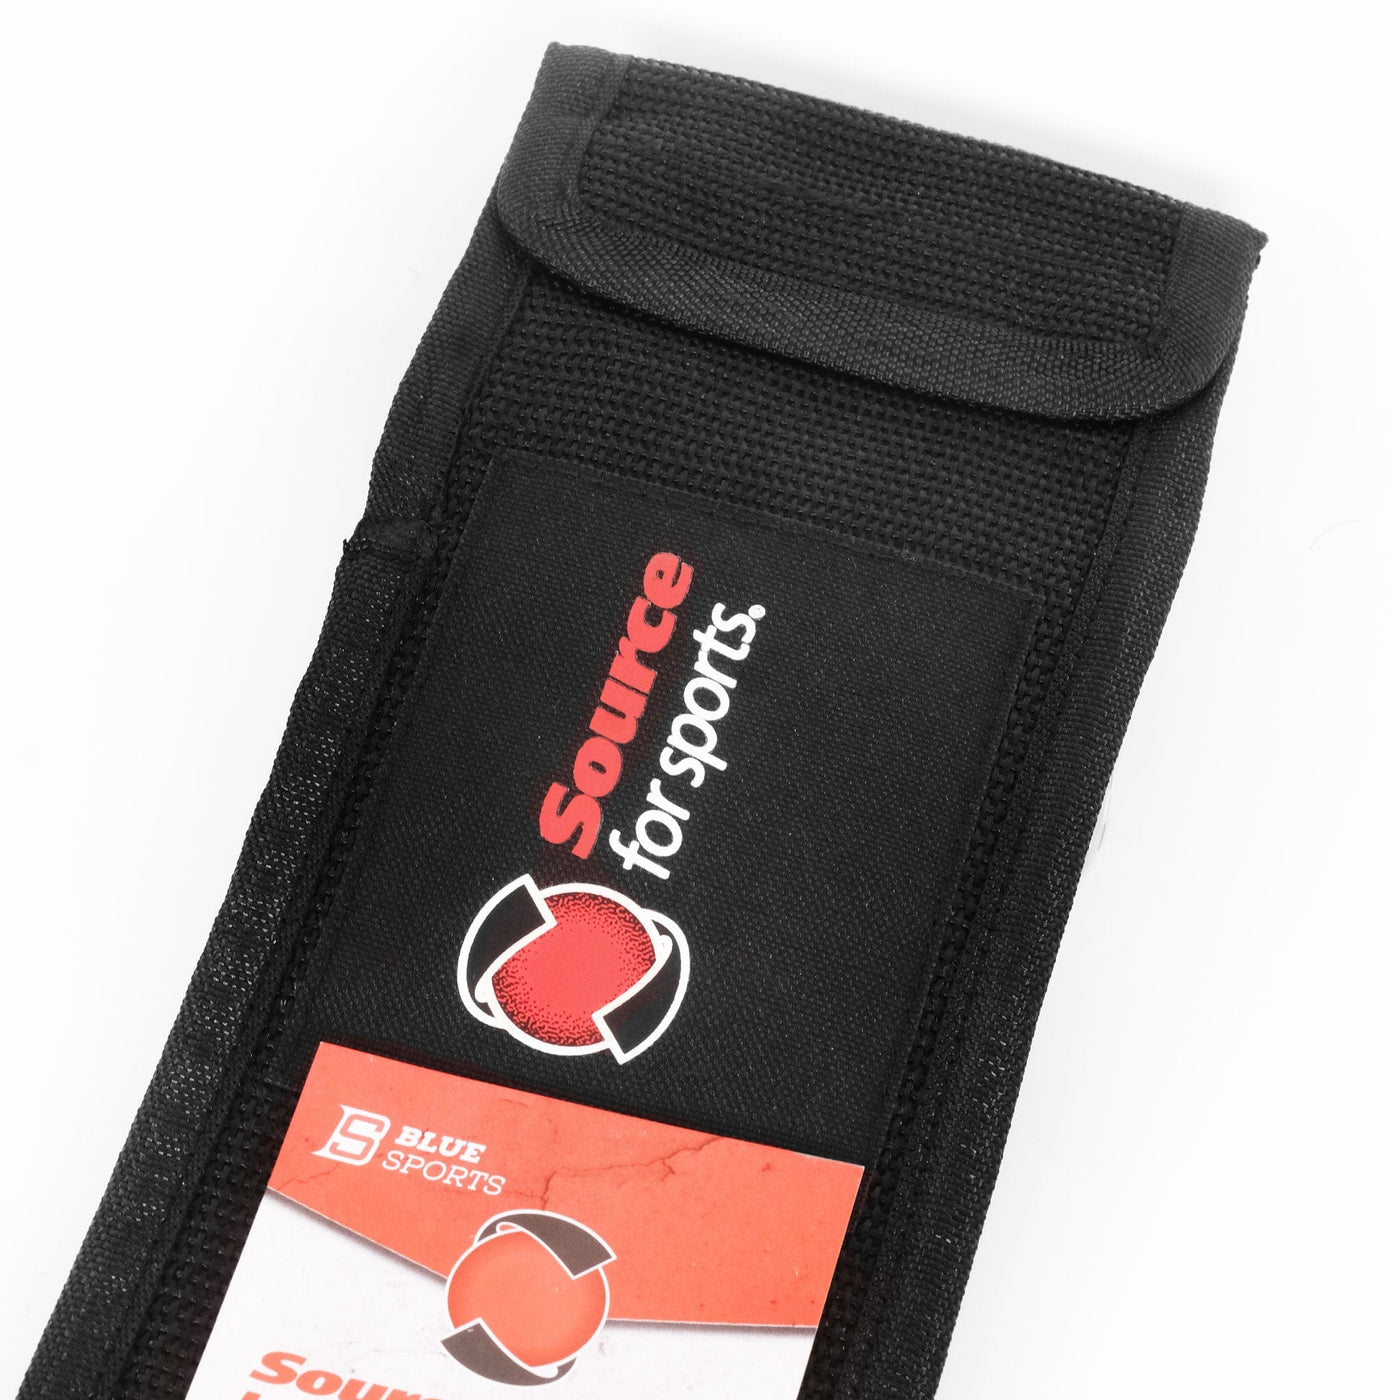 Blue Sports Skate Blade Pouch - The Hockey Shop Source For Sports